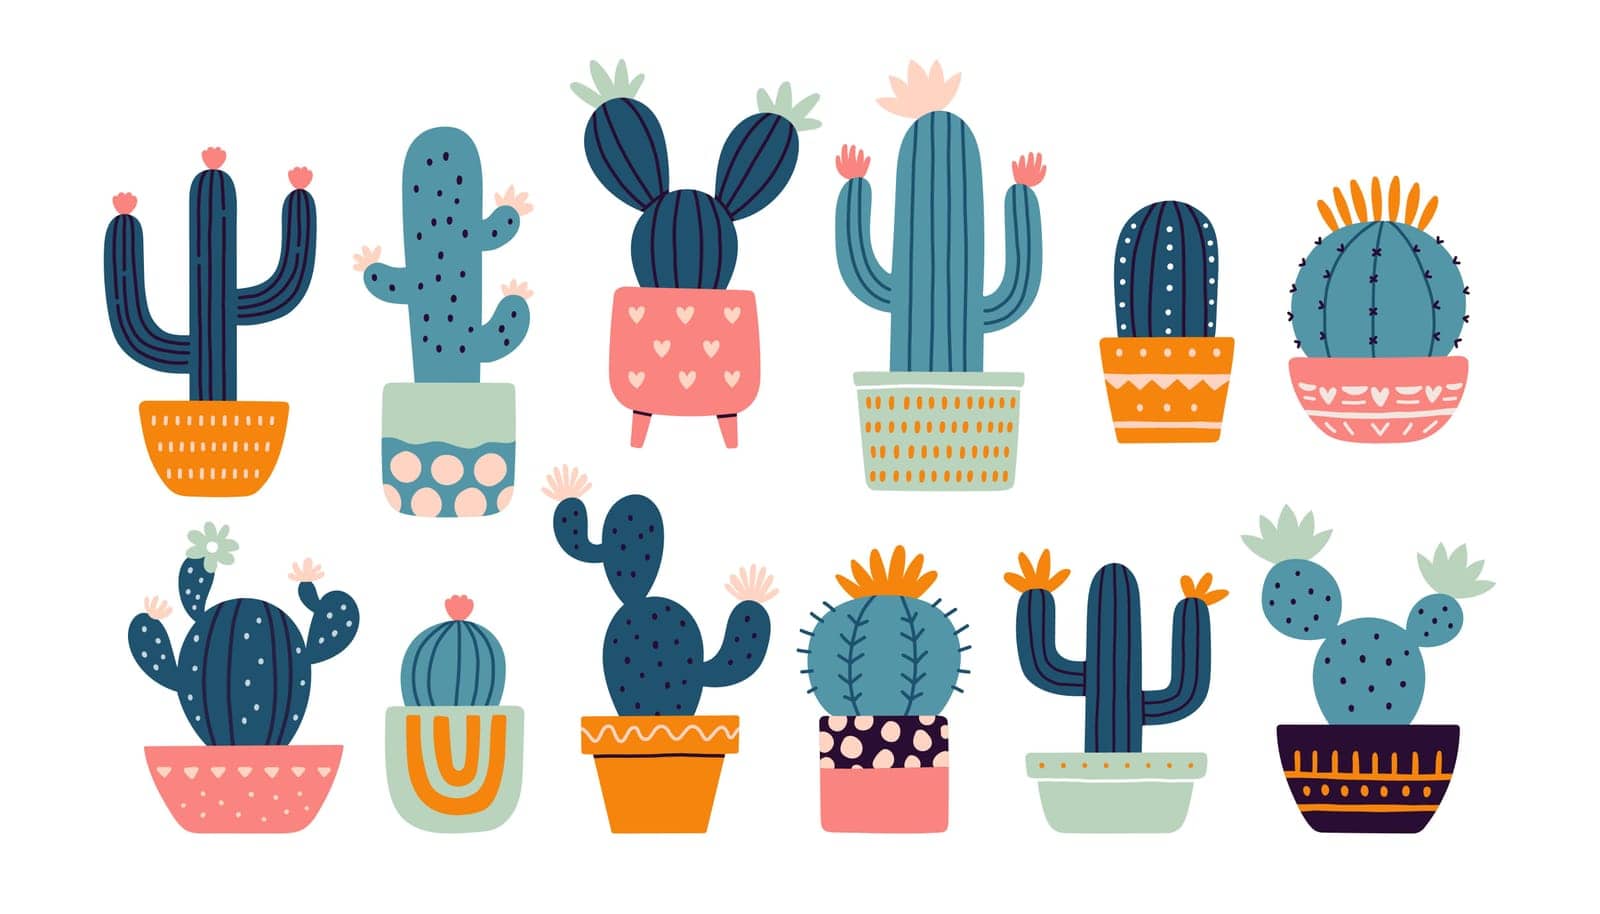 Cactus set. Mexican cactus in pot. Desert spiny plant, mexico cacti flower and tropical home plants or arizona summer climate garden cactuses. Flora isolated vector stickers collection